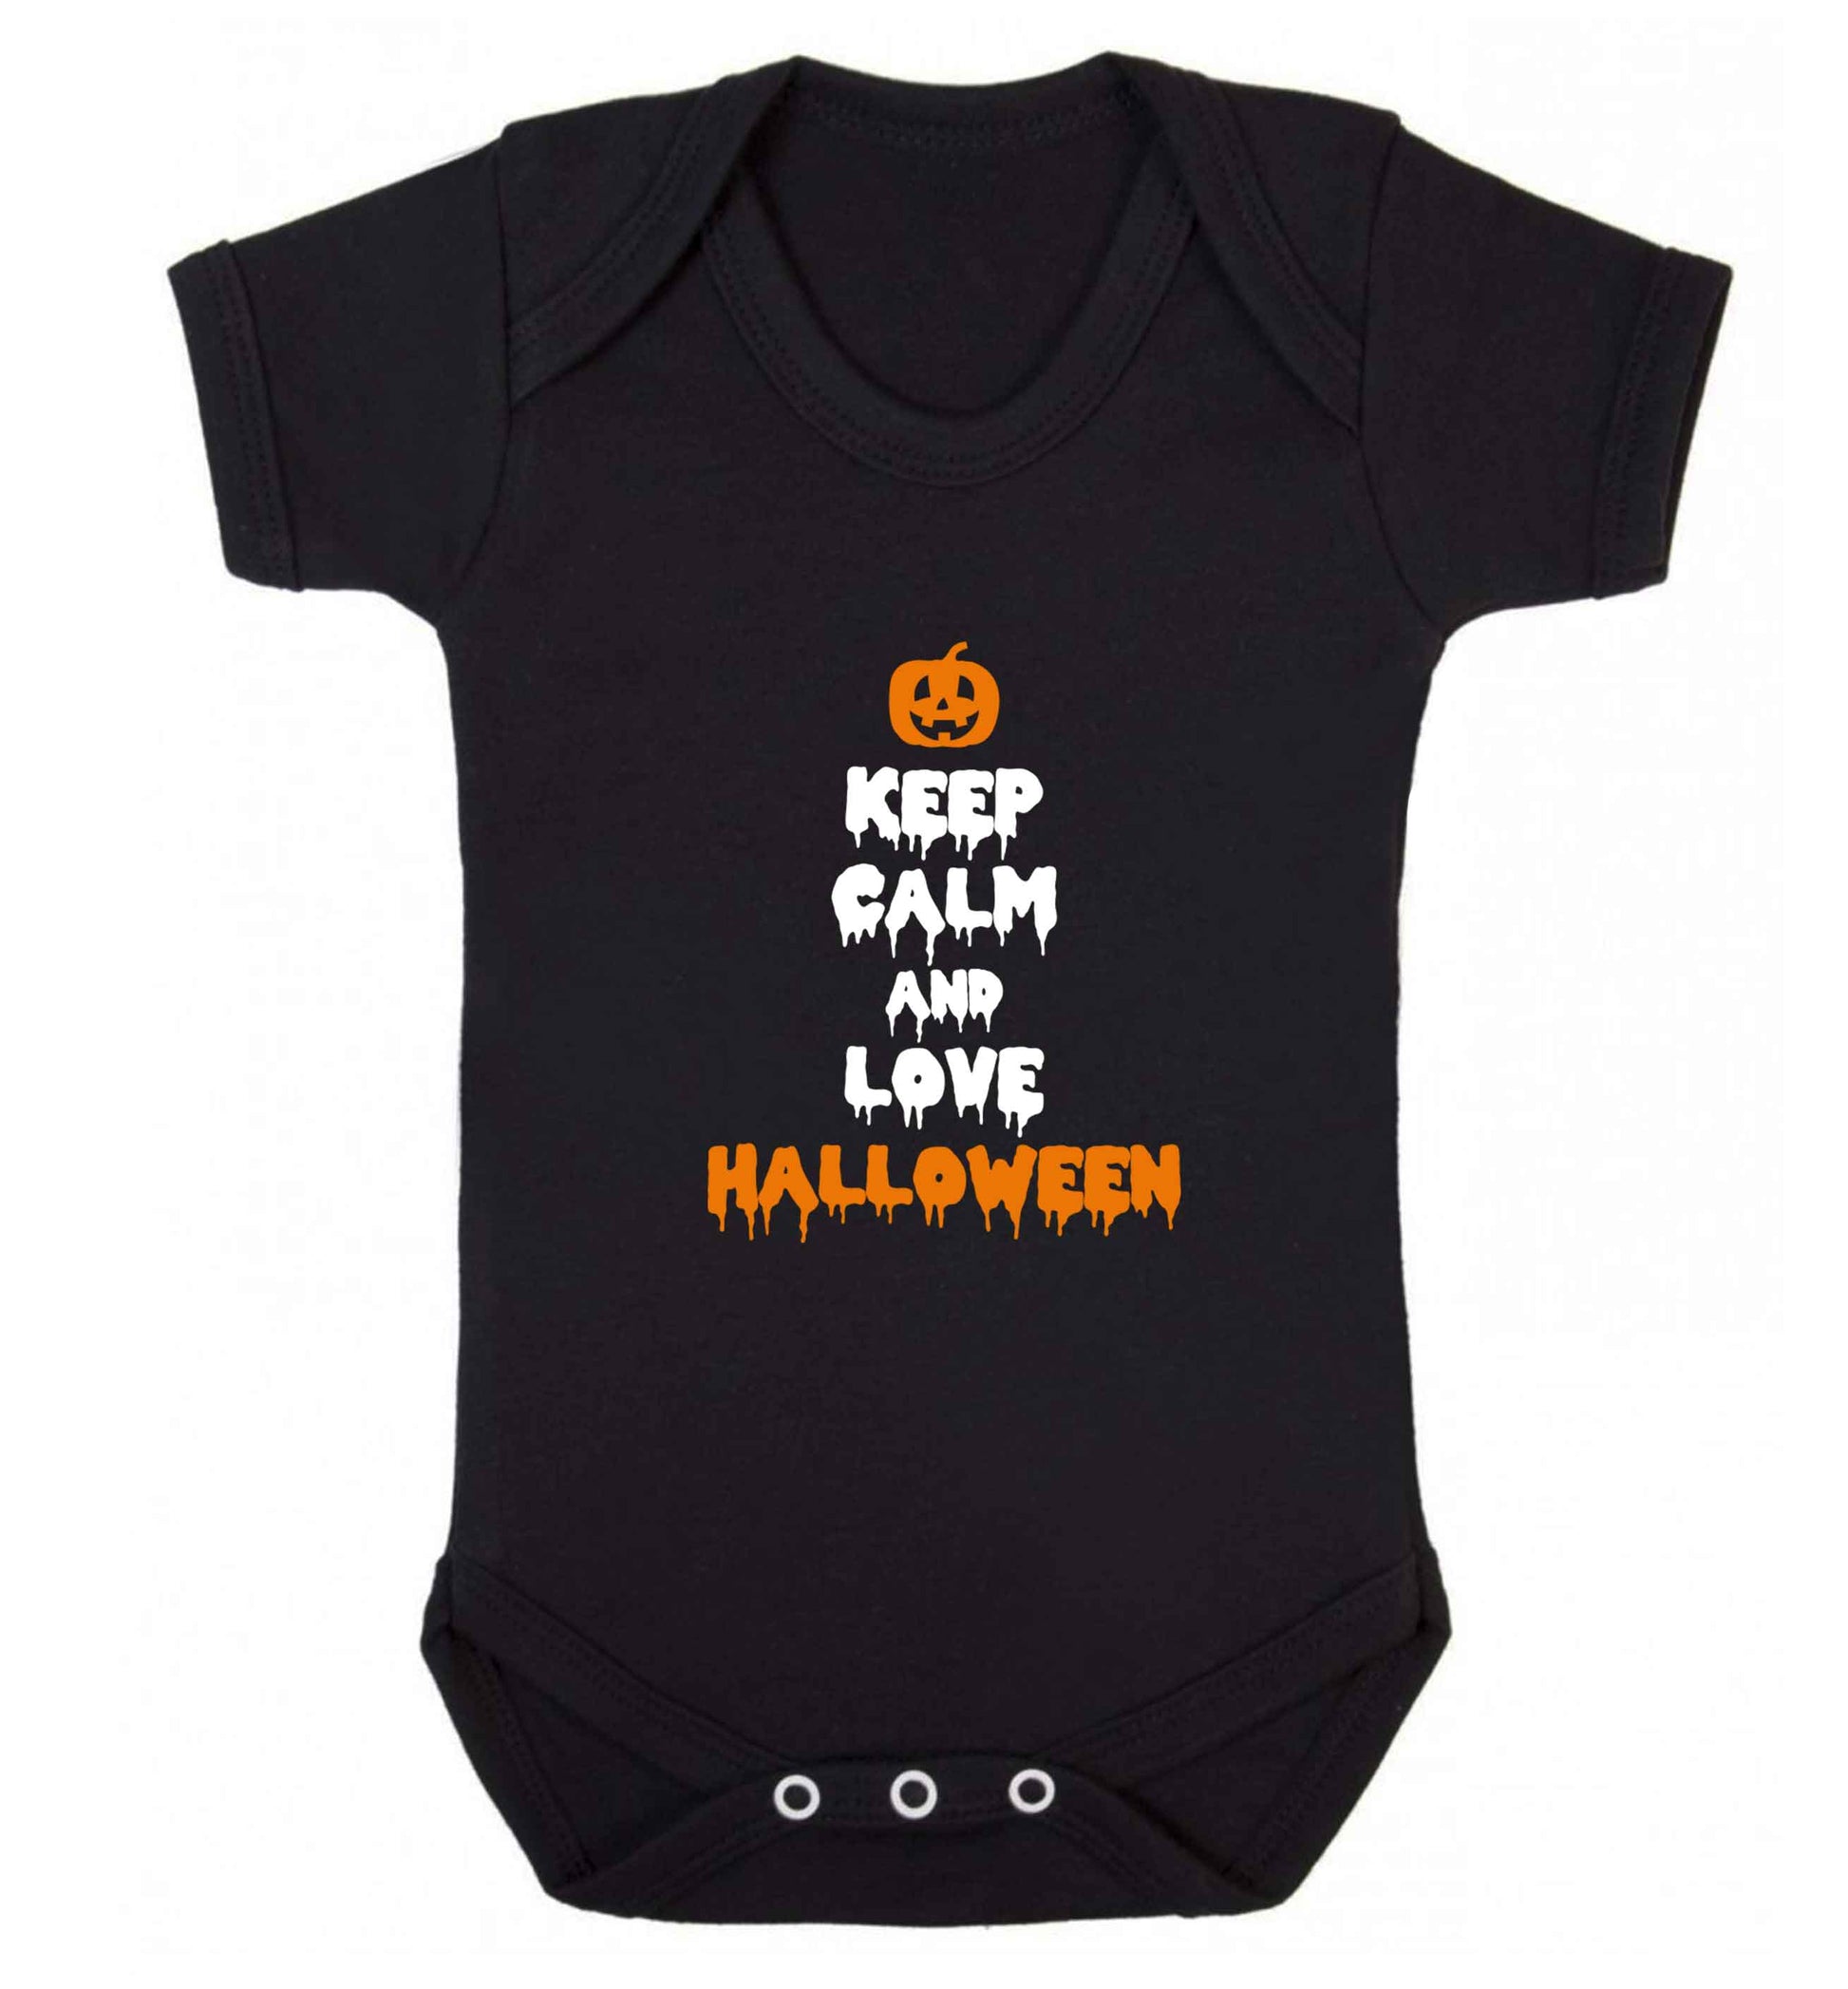 Keep calm and love halloween baby vest black 18-24 months